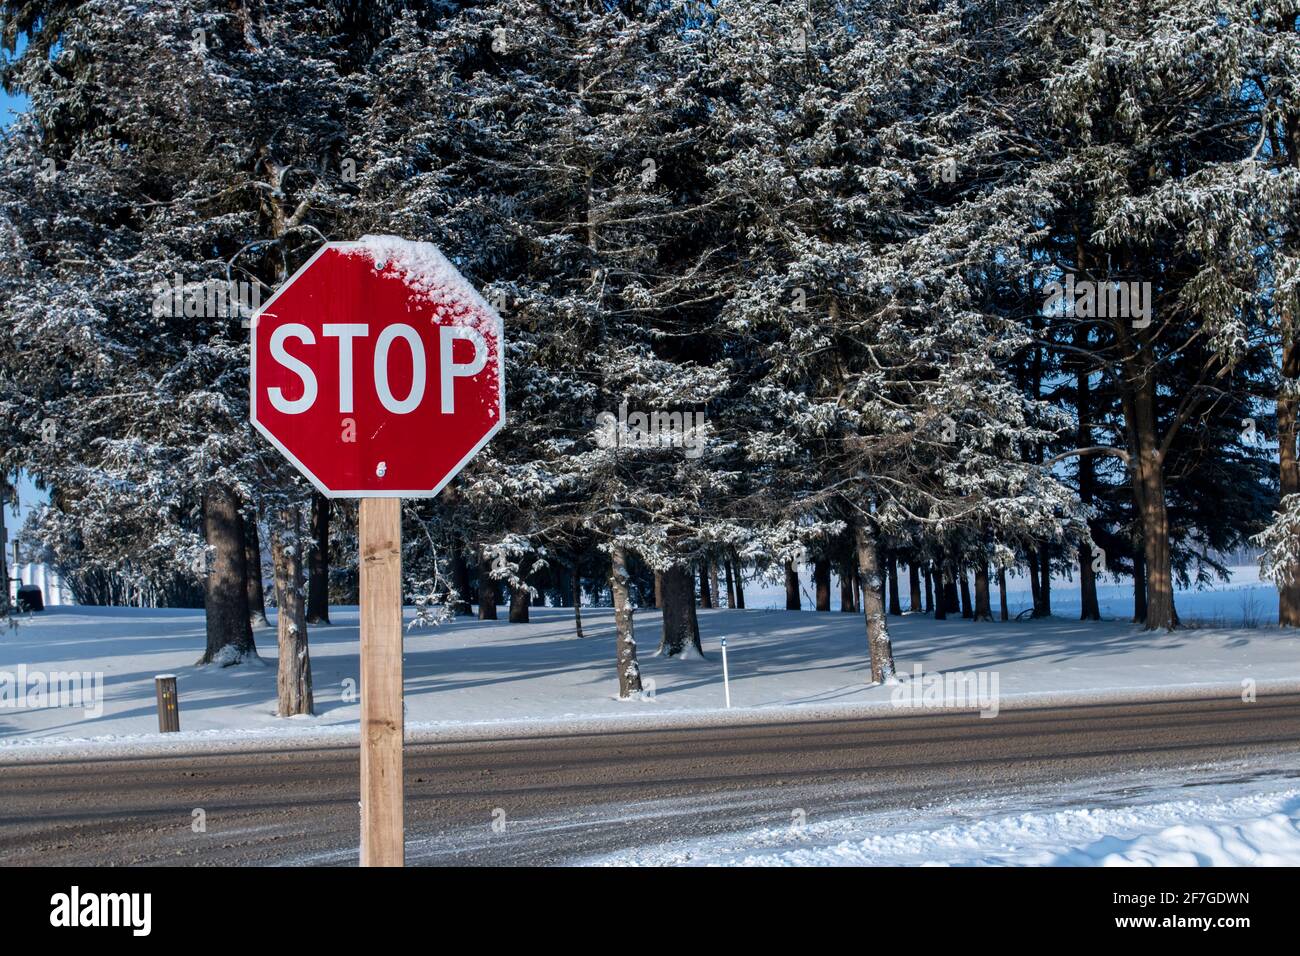 View of a stop sign from inside a car on a blistery cold winter day in Southwestern Ontario, Canada. Stock Photo